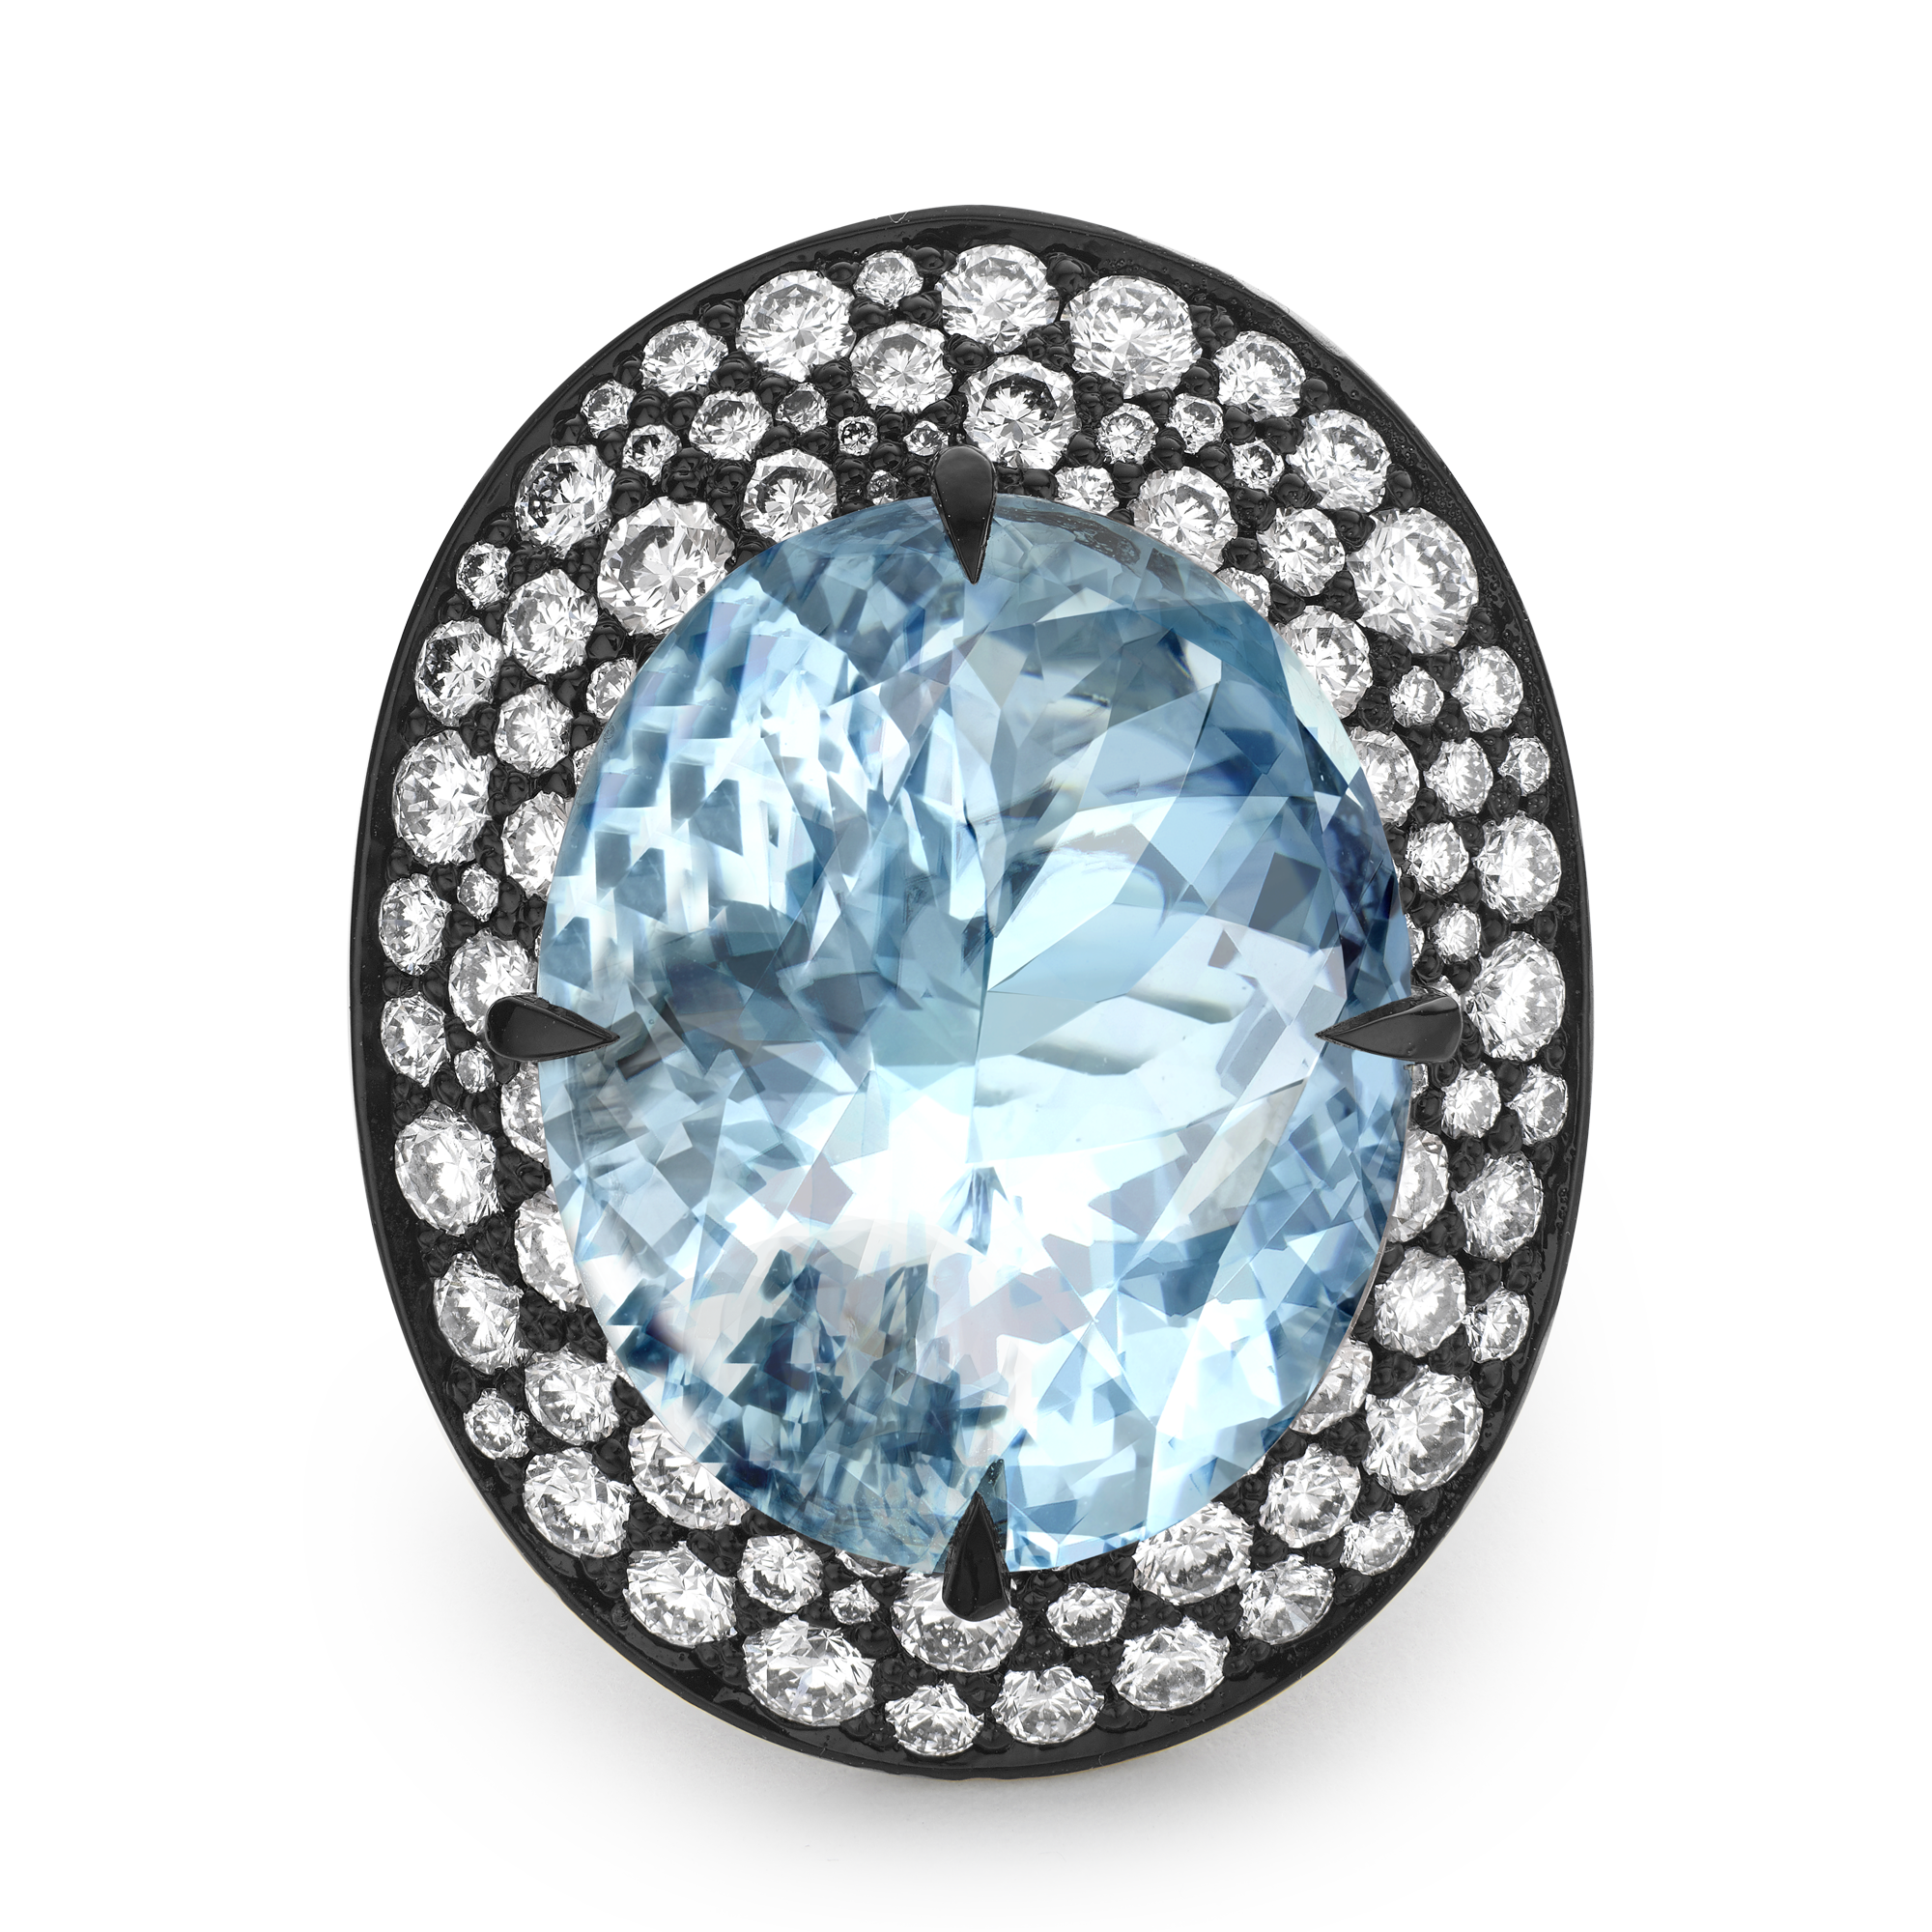 Snowstorm 21.08ct Aquamarine and Diamond Cocktail Ring Oval Cut, Claw Set_2